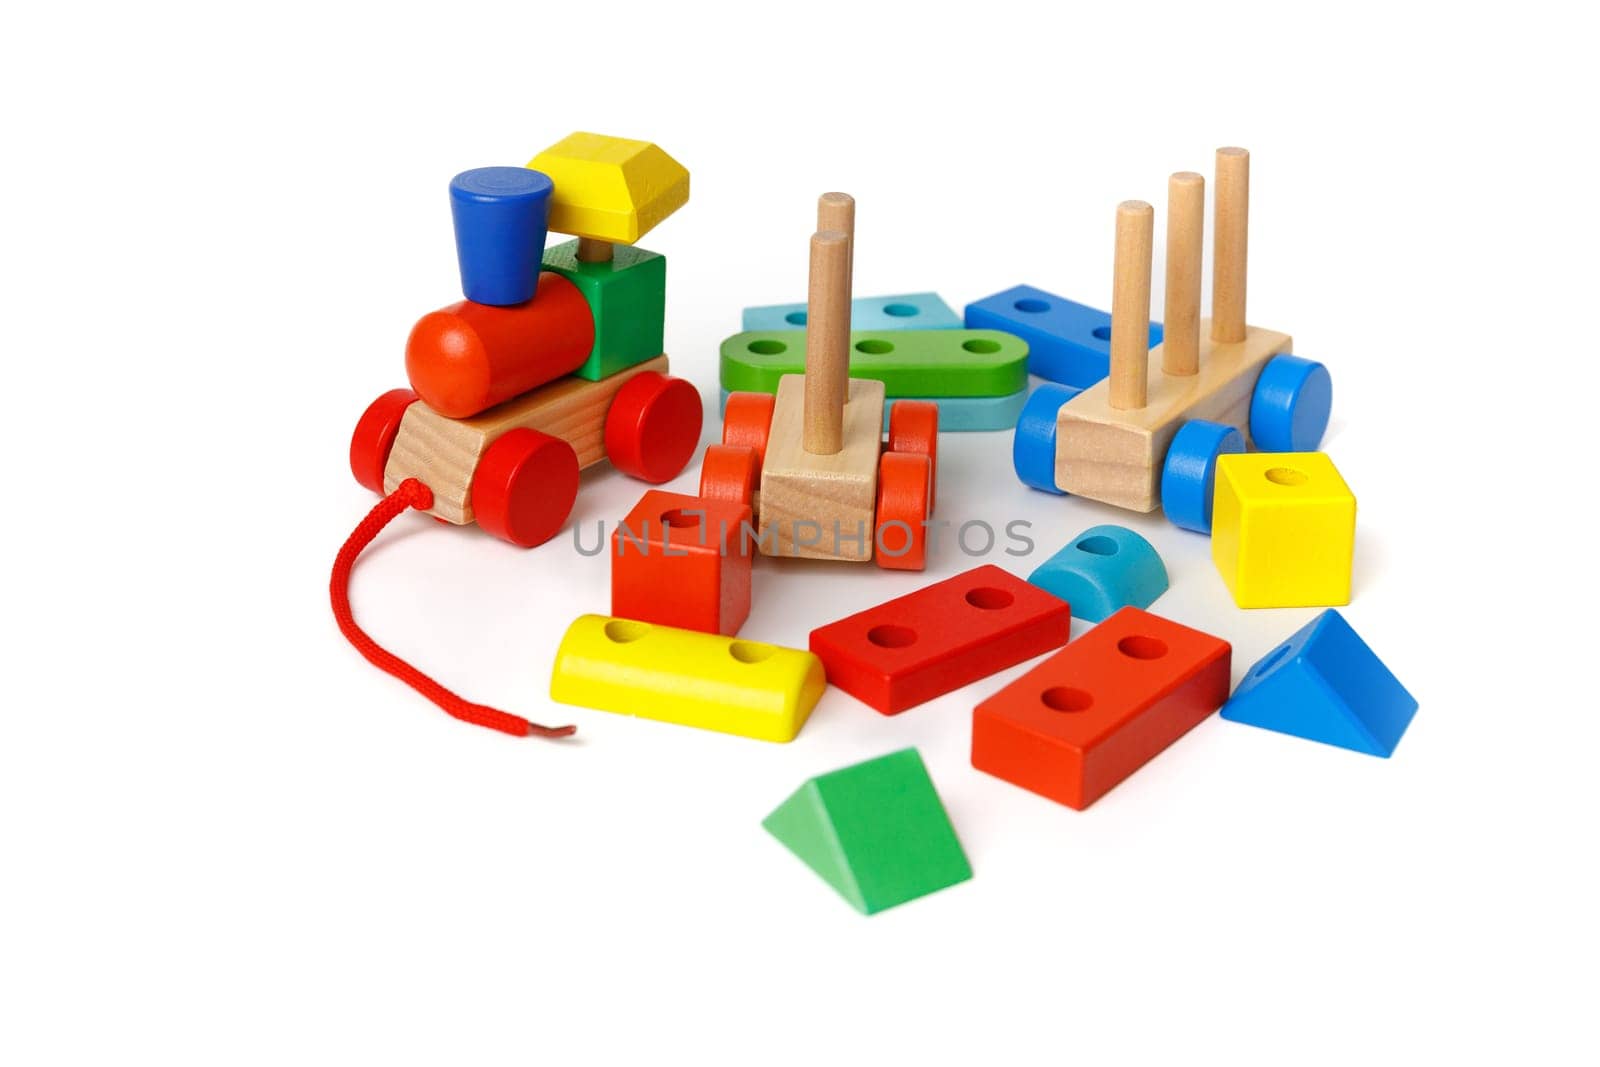 A set of Montessori children's educational toys made from different blocks and puzzles isolated on white background.